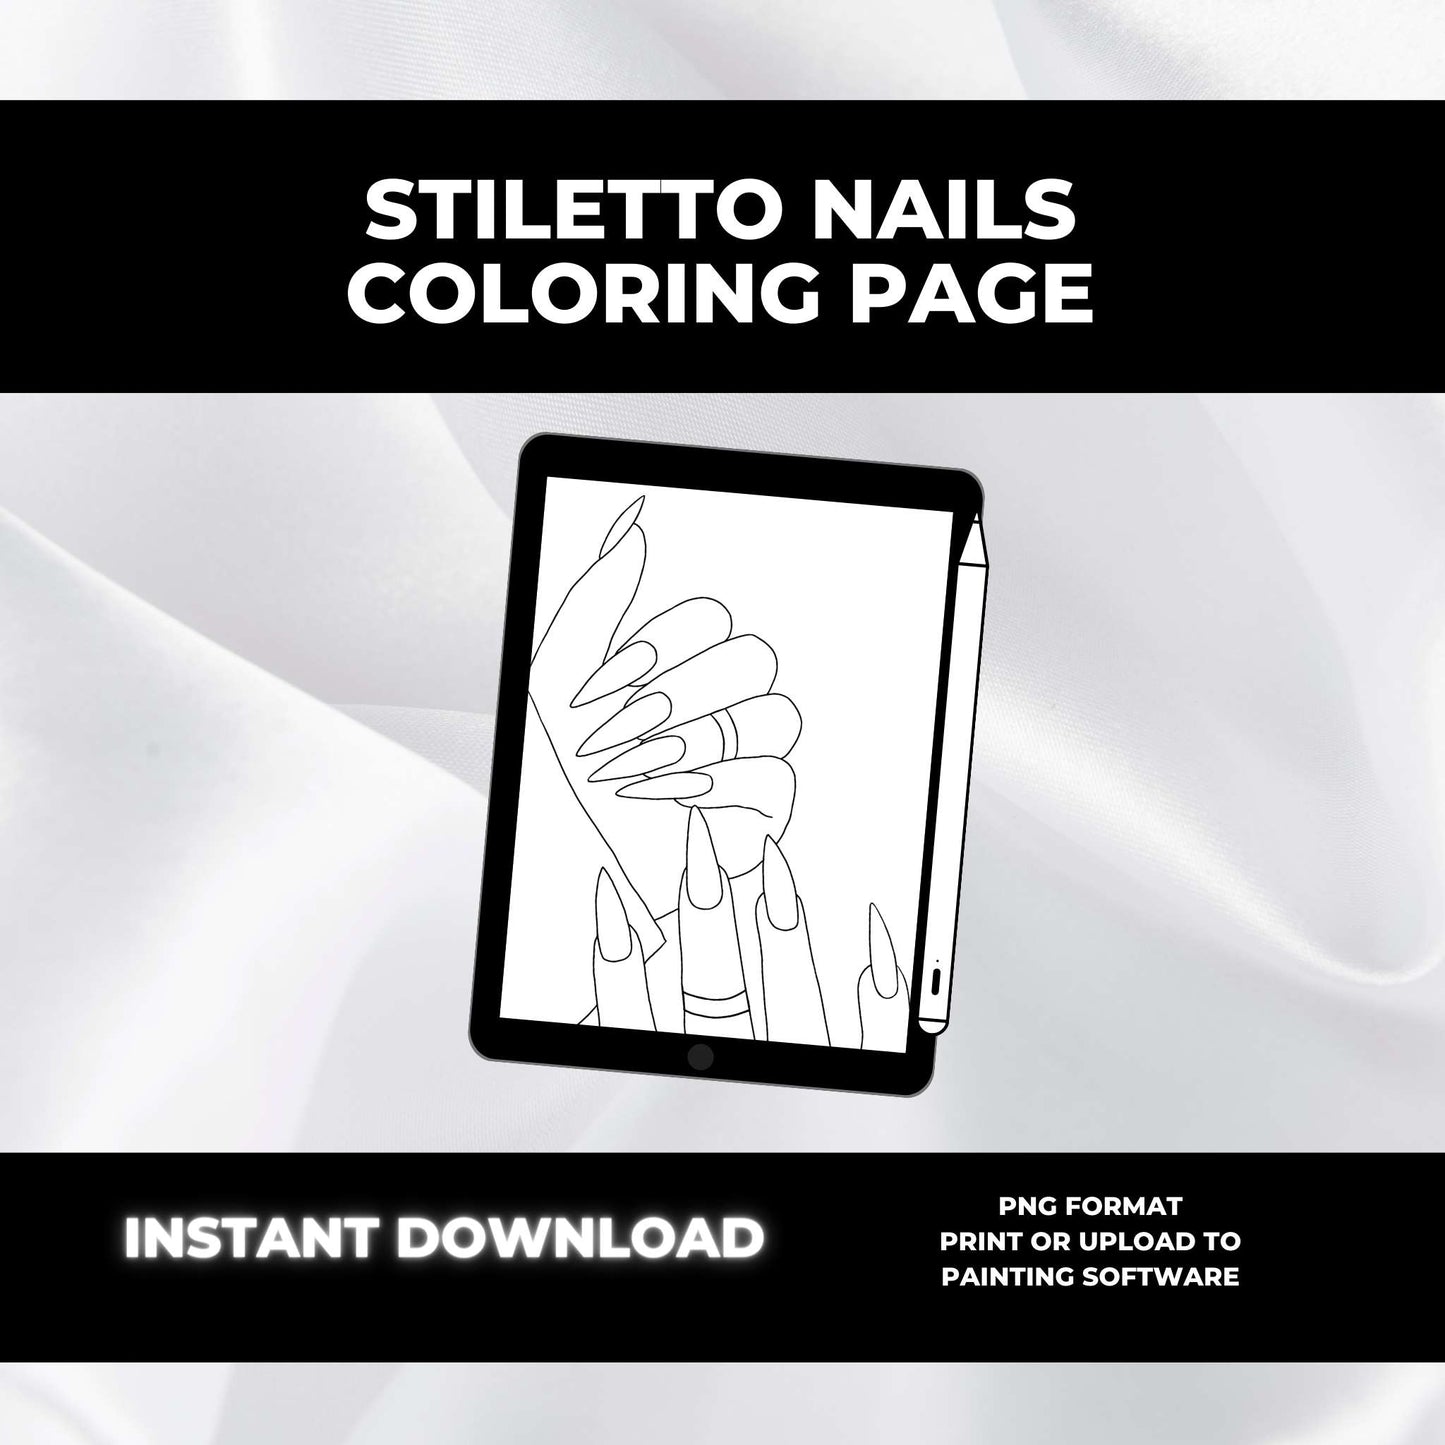 Stiletto Nails Coloring Page